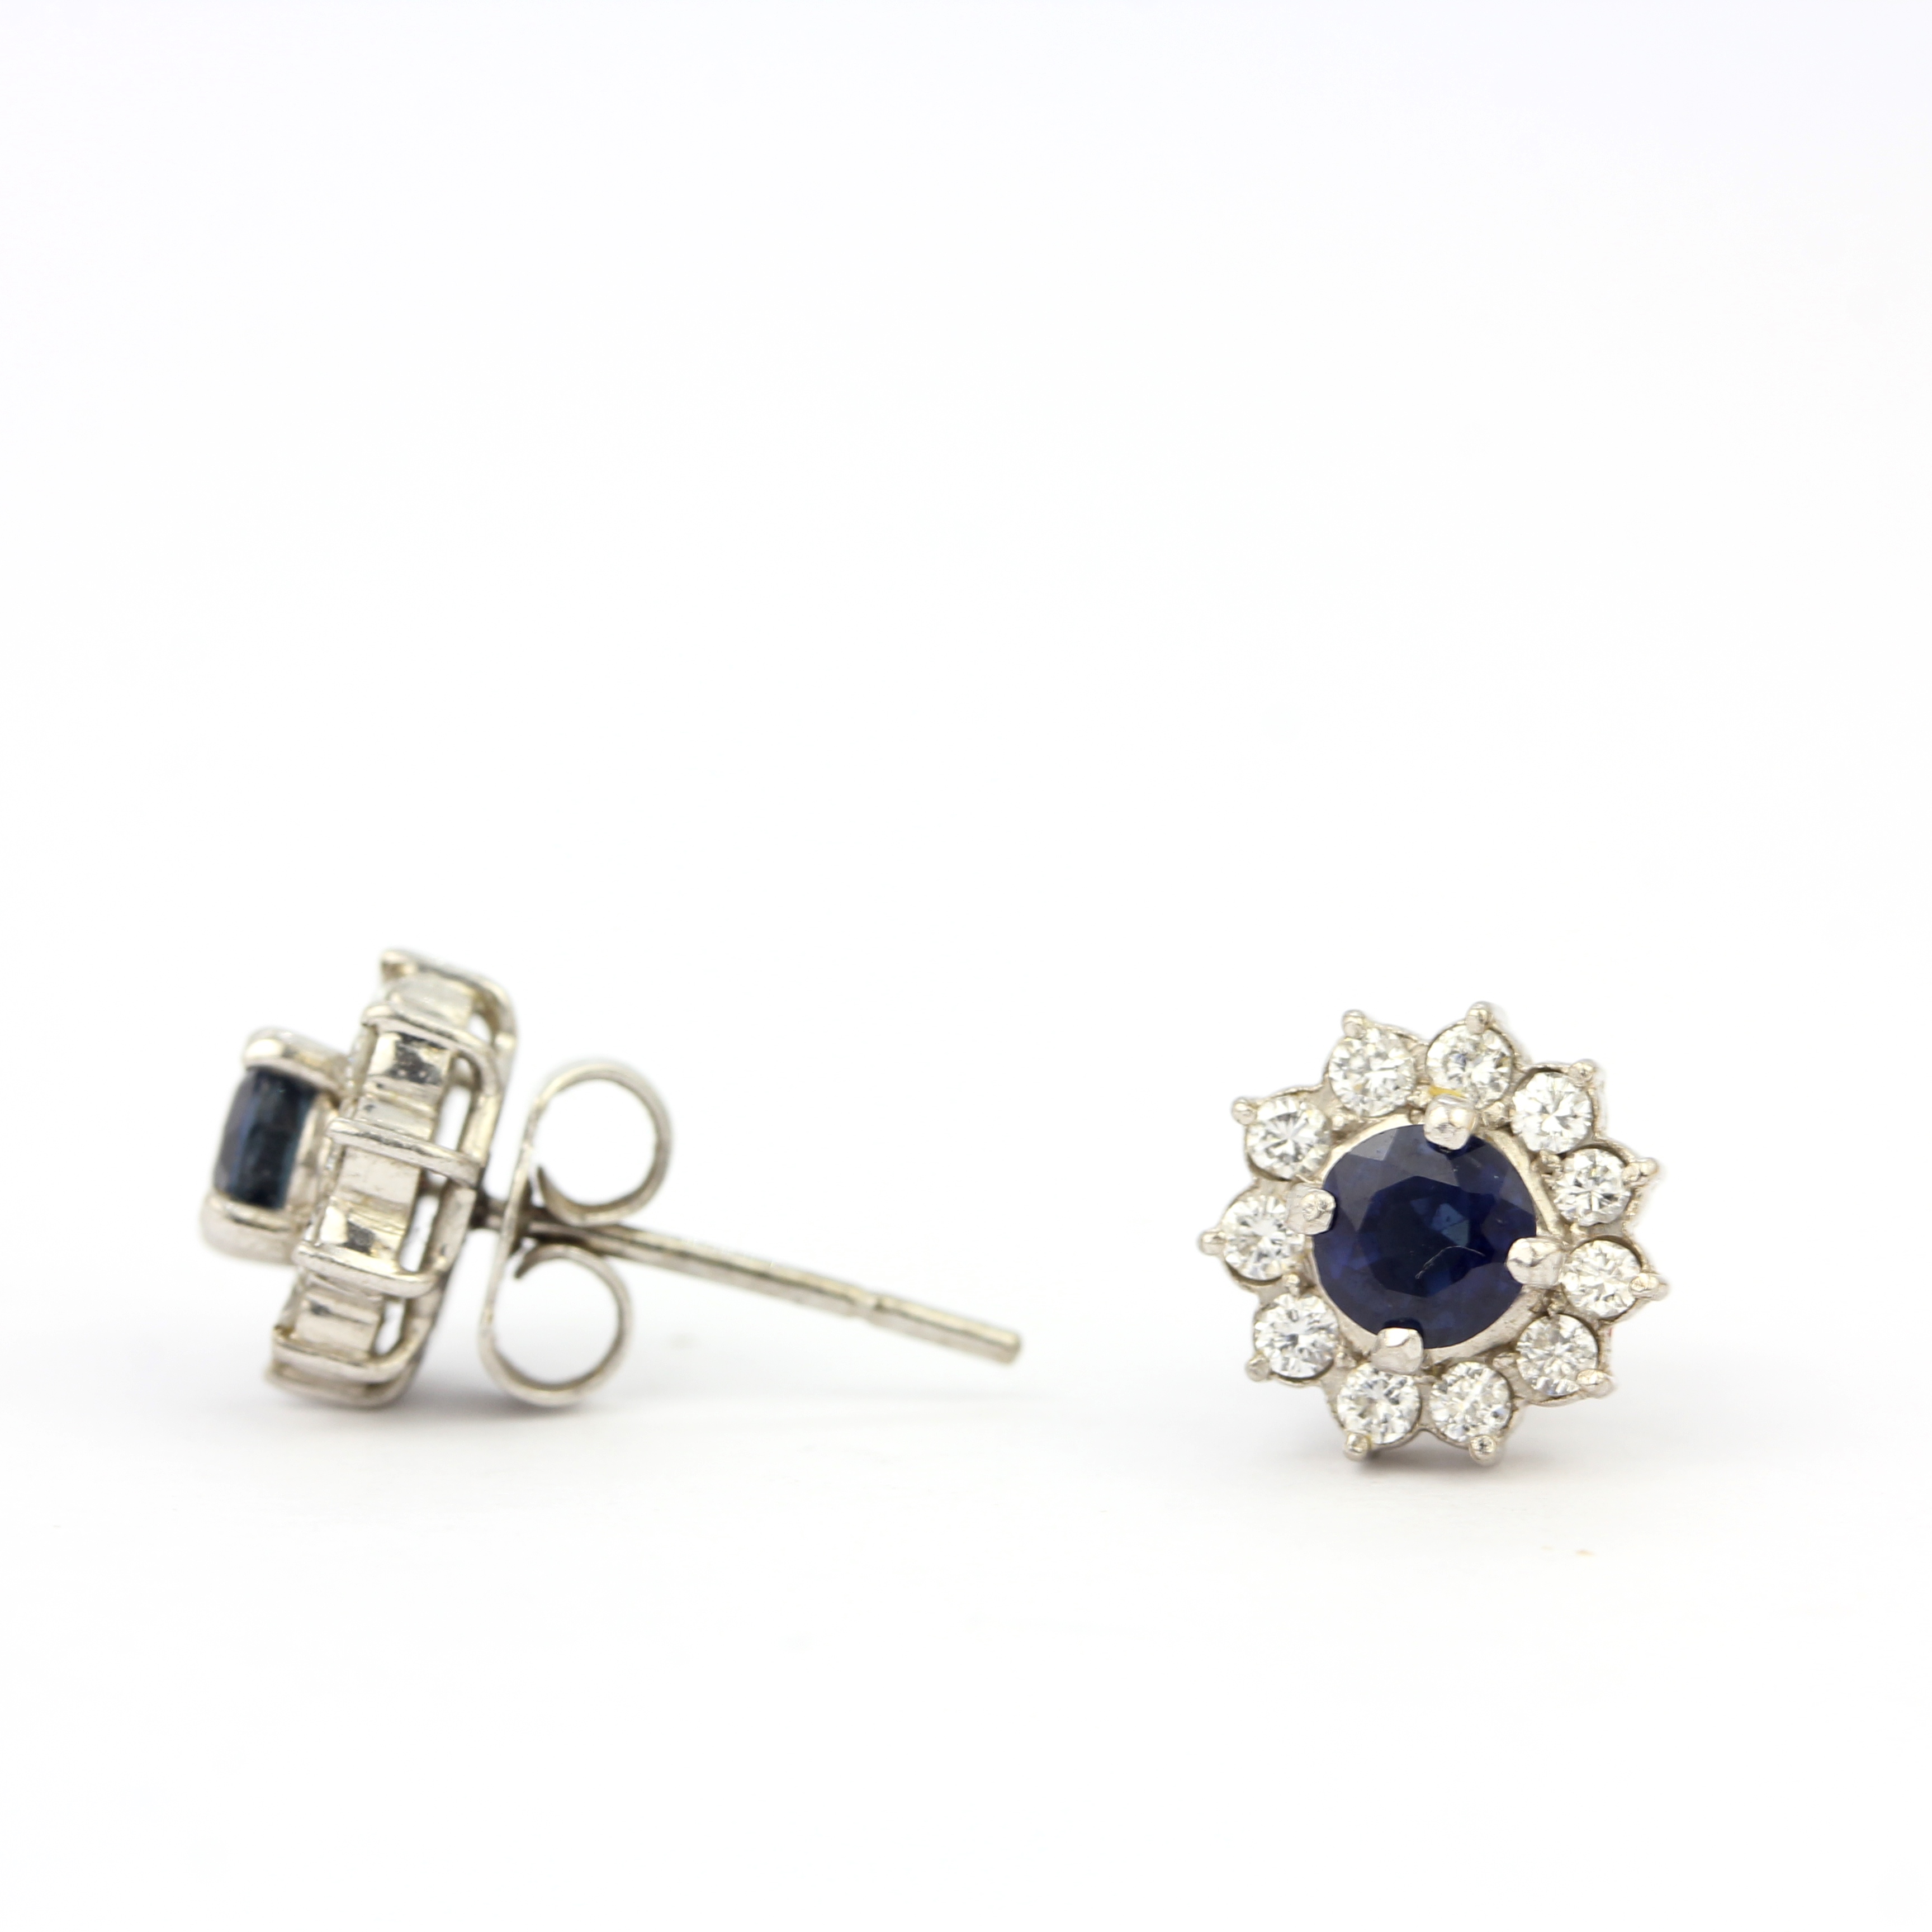 A pair of 18ct white gold cluster earrings set with sapphires and brilliant cut diamonds, Dia. 1cm. - Image 2 of 3